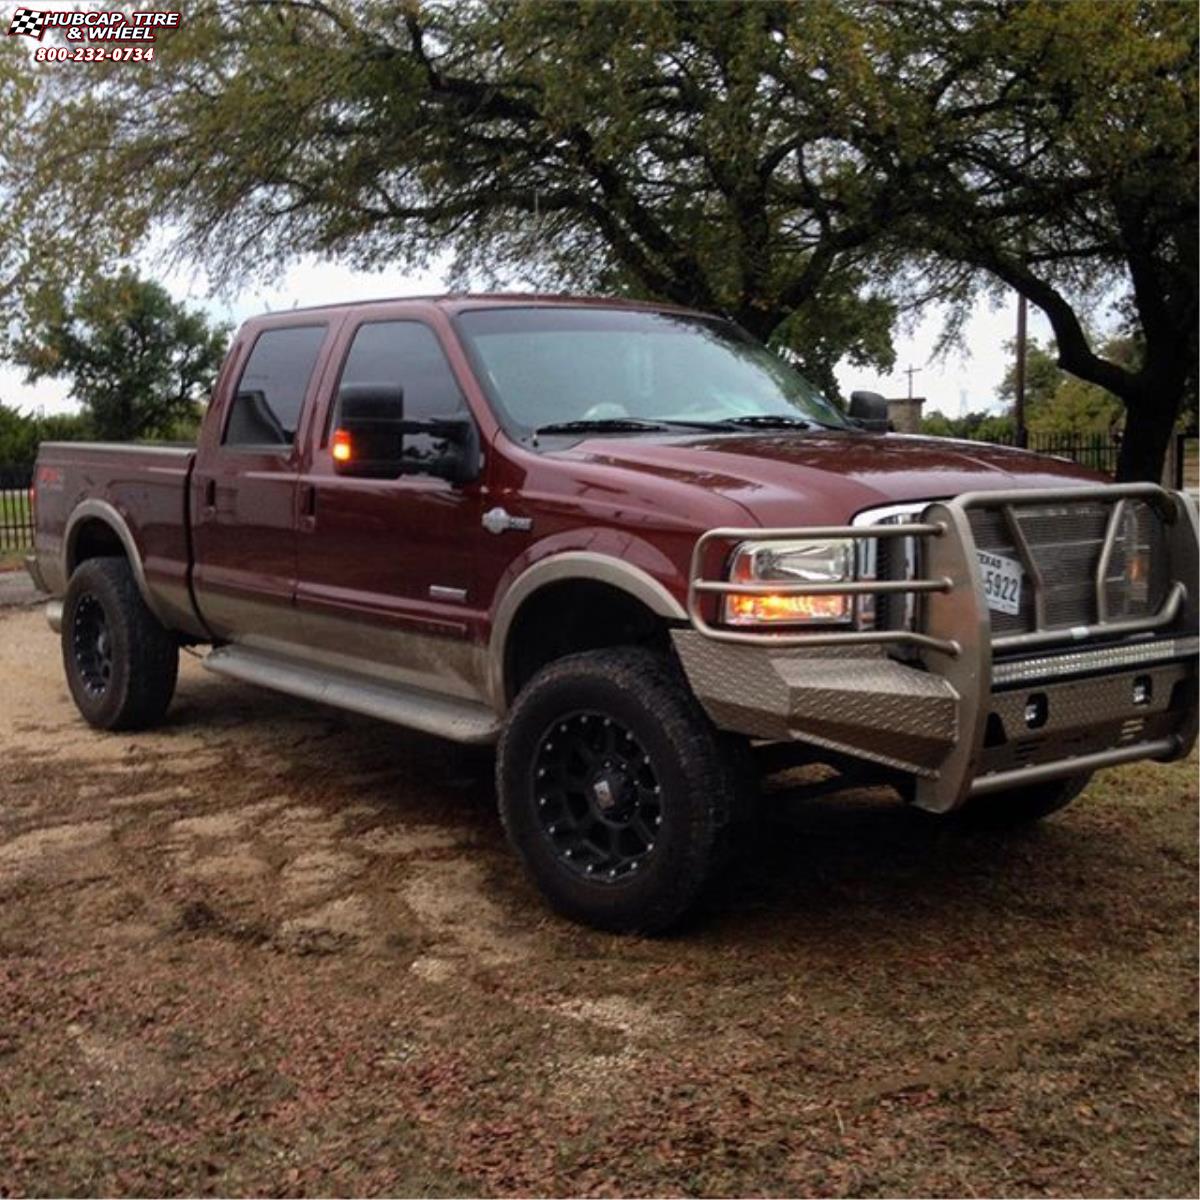 vehicle gallery/ford f 250 xd series xd807 strike x  Matte Black wheels and rims